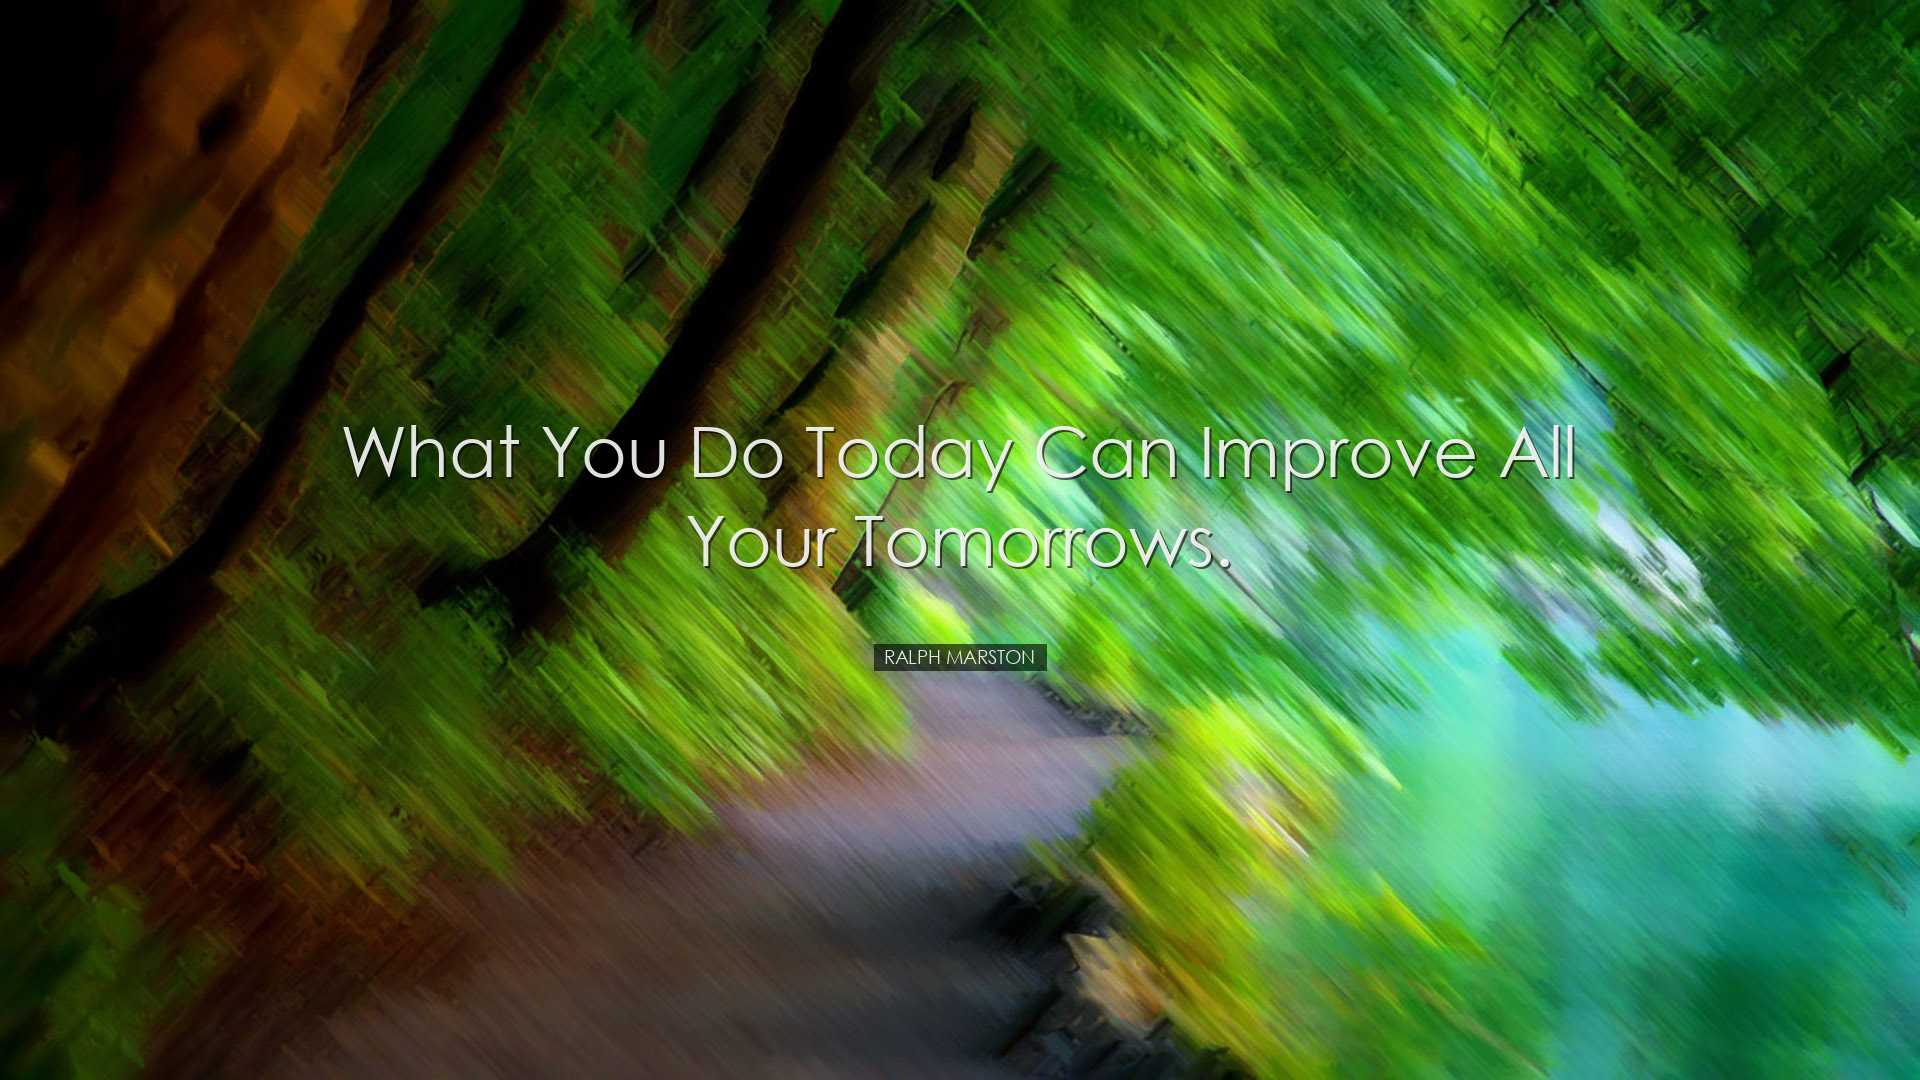 What you do today can improve all your tomorrows. - Ralph Marston